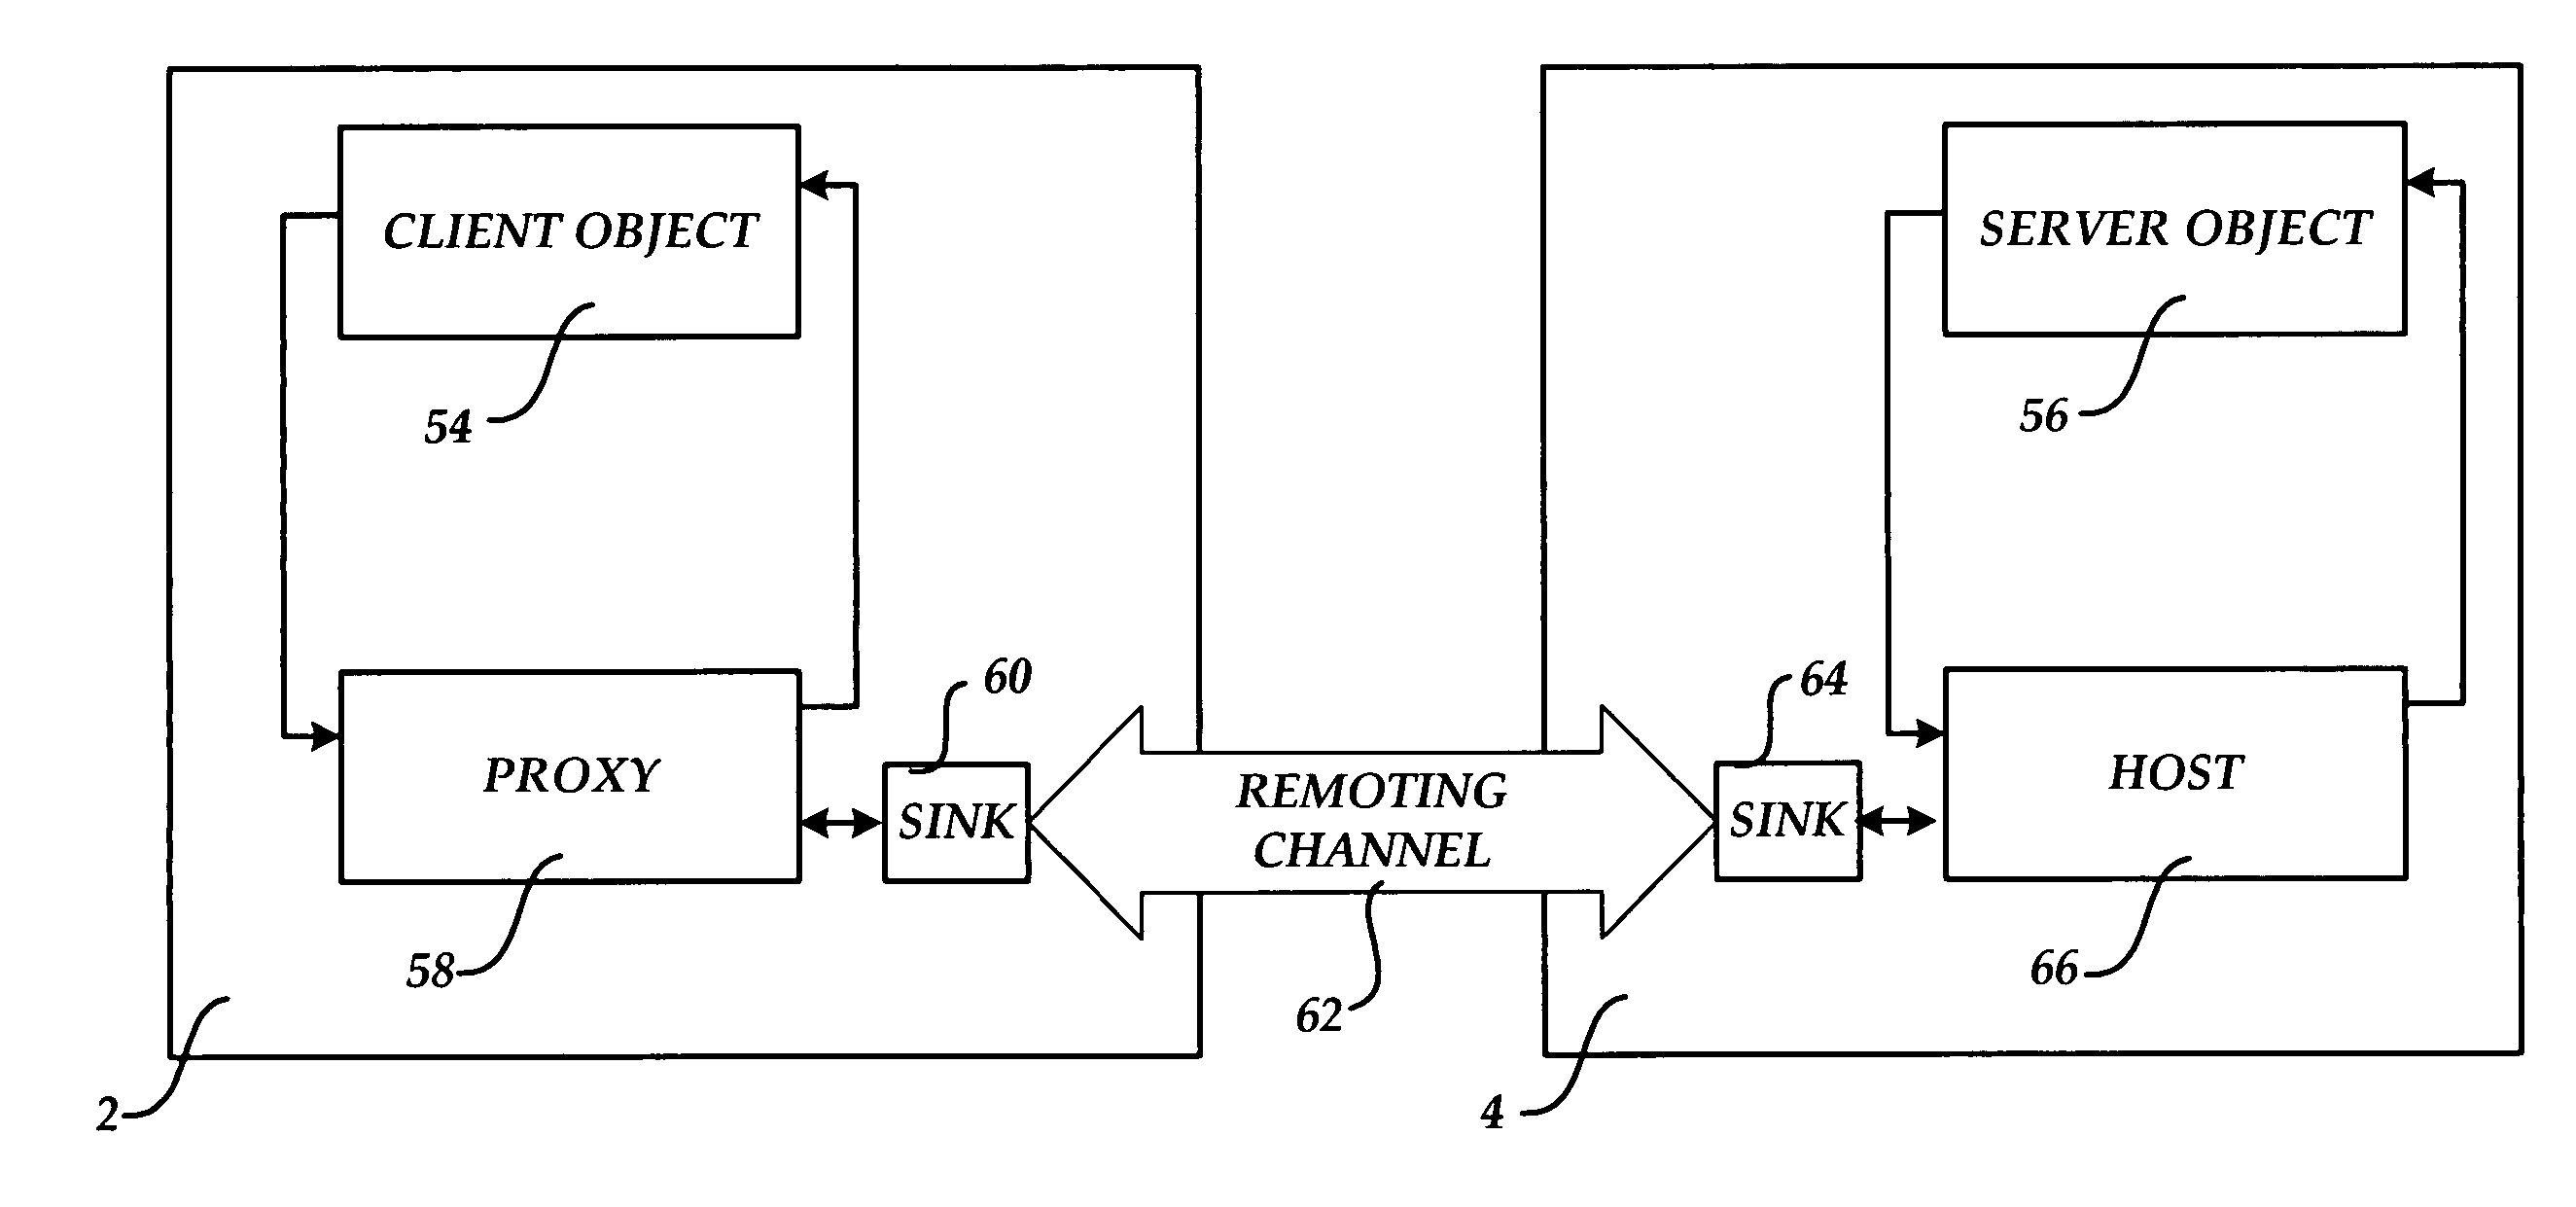 Instant messaging communications channel for transporting data between objects executing within a managed code environment